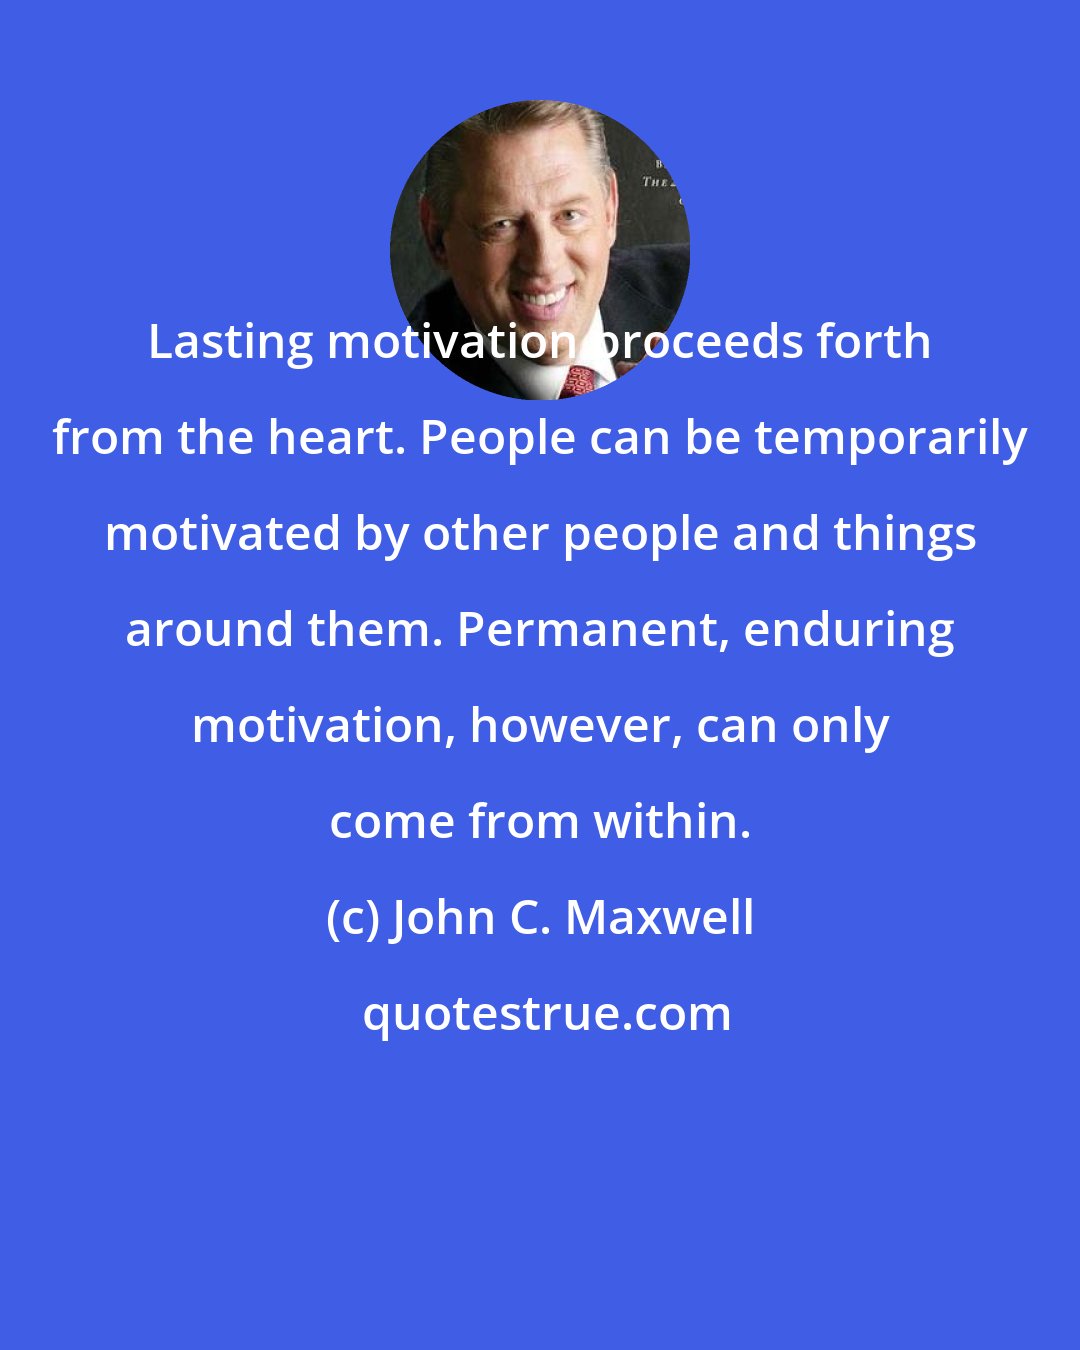 John C. Maxwell: Lasting motivation proceeds forth from the heart. People can be temporarily motivated by other people and things around them. Permanent, enduring motivation, however, can only come from within.